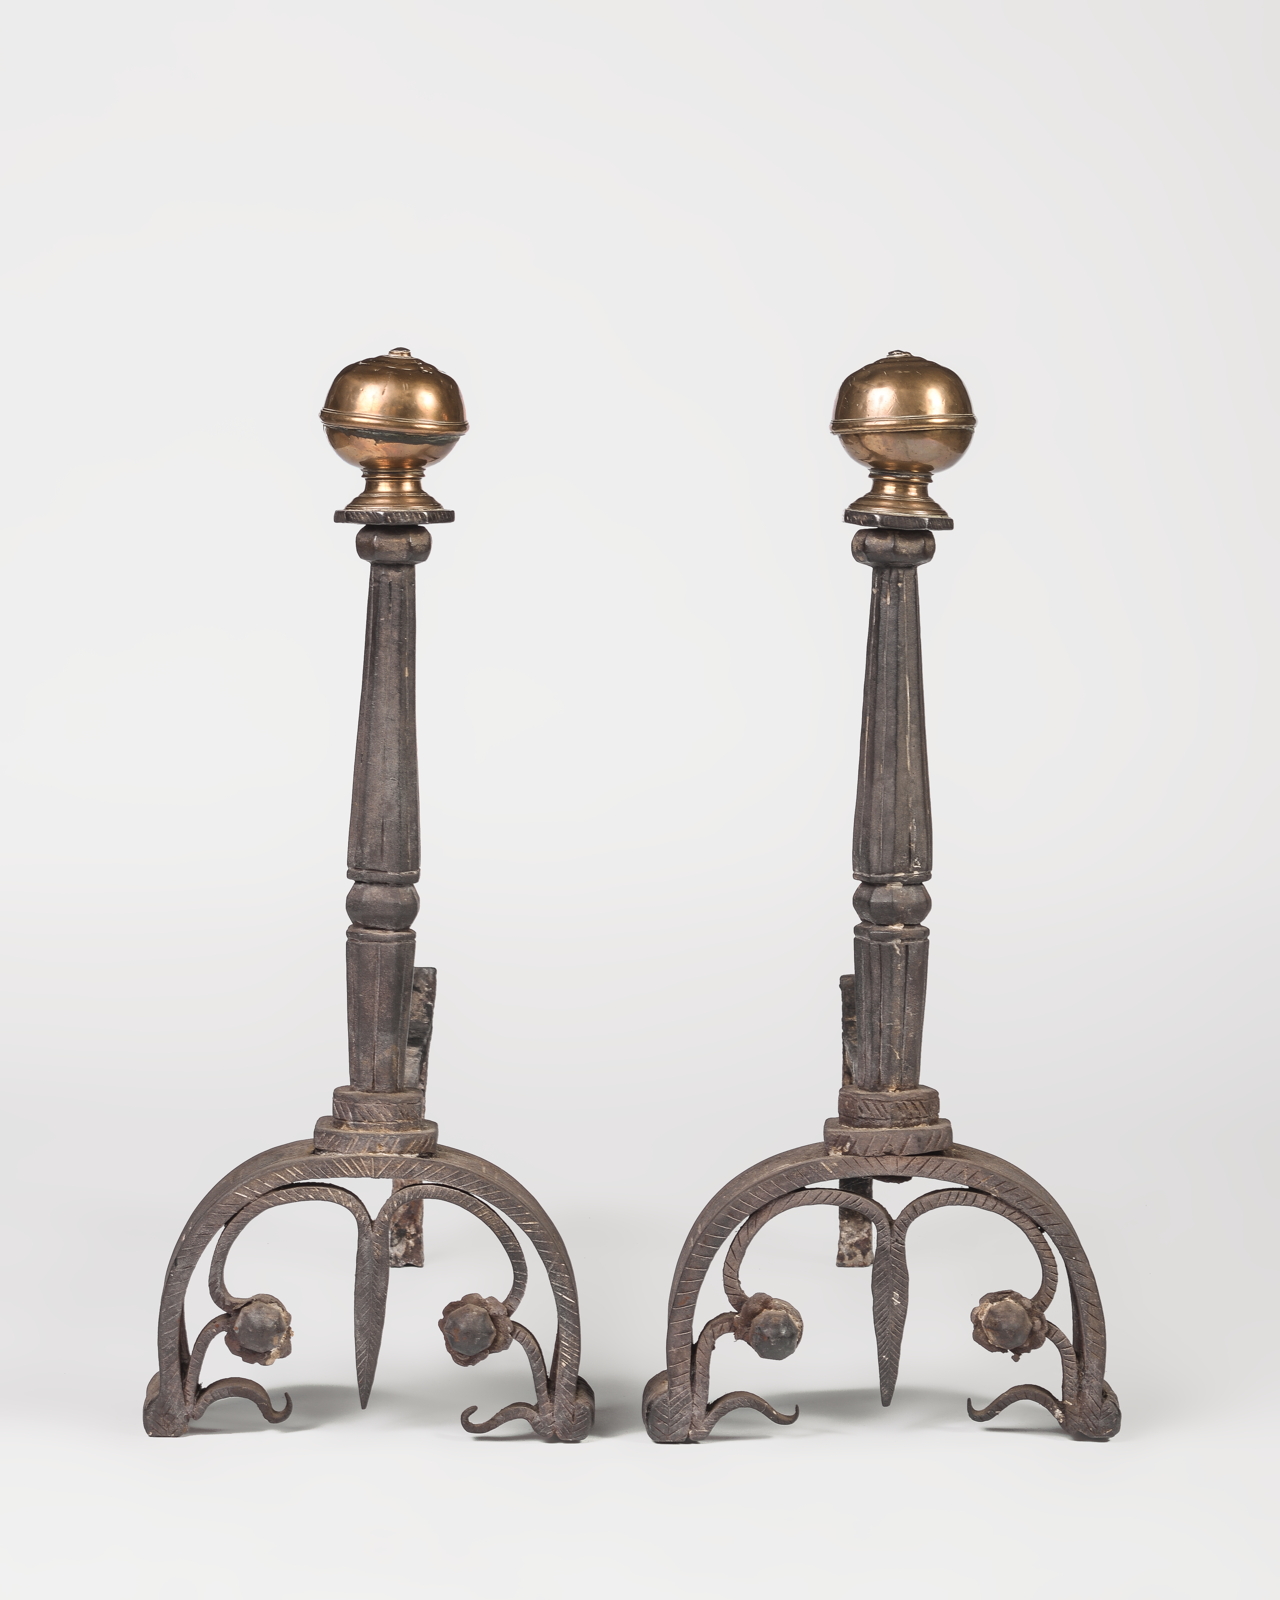 A rare and fine pair of 17th century European andirons